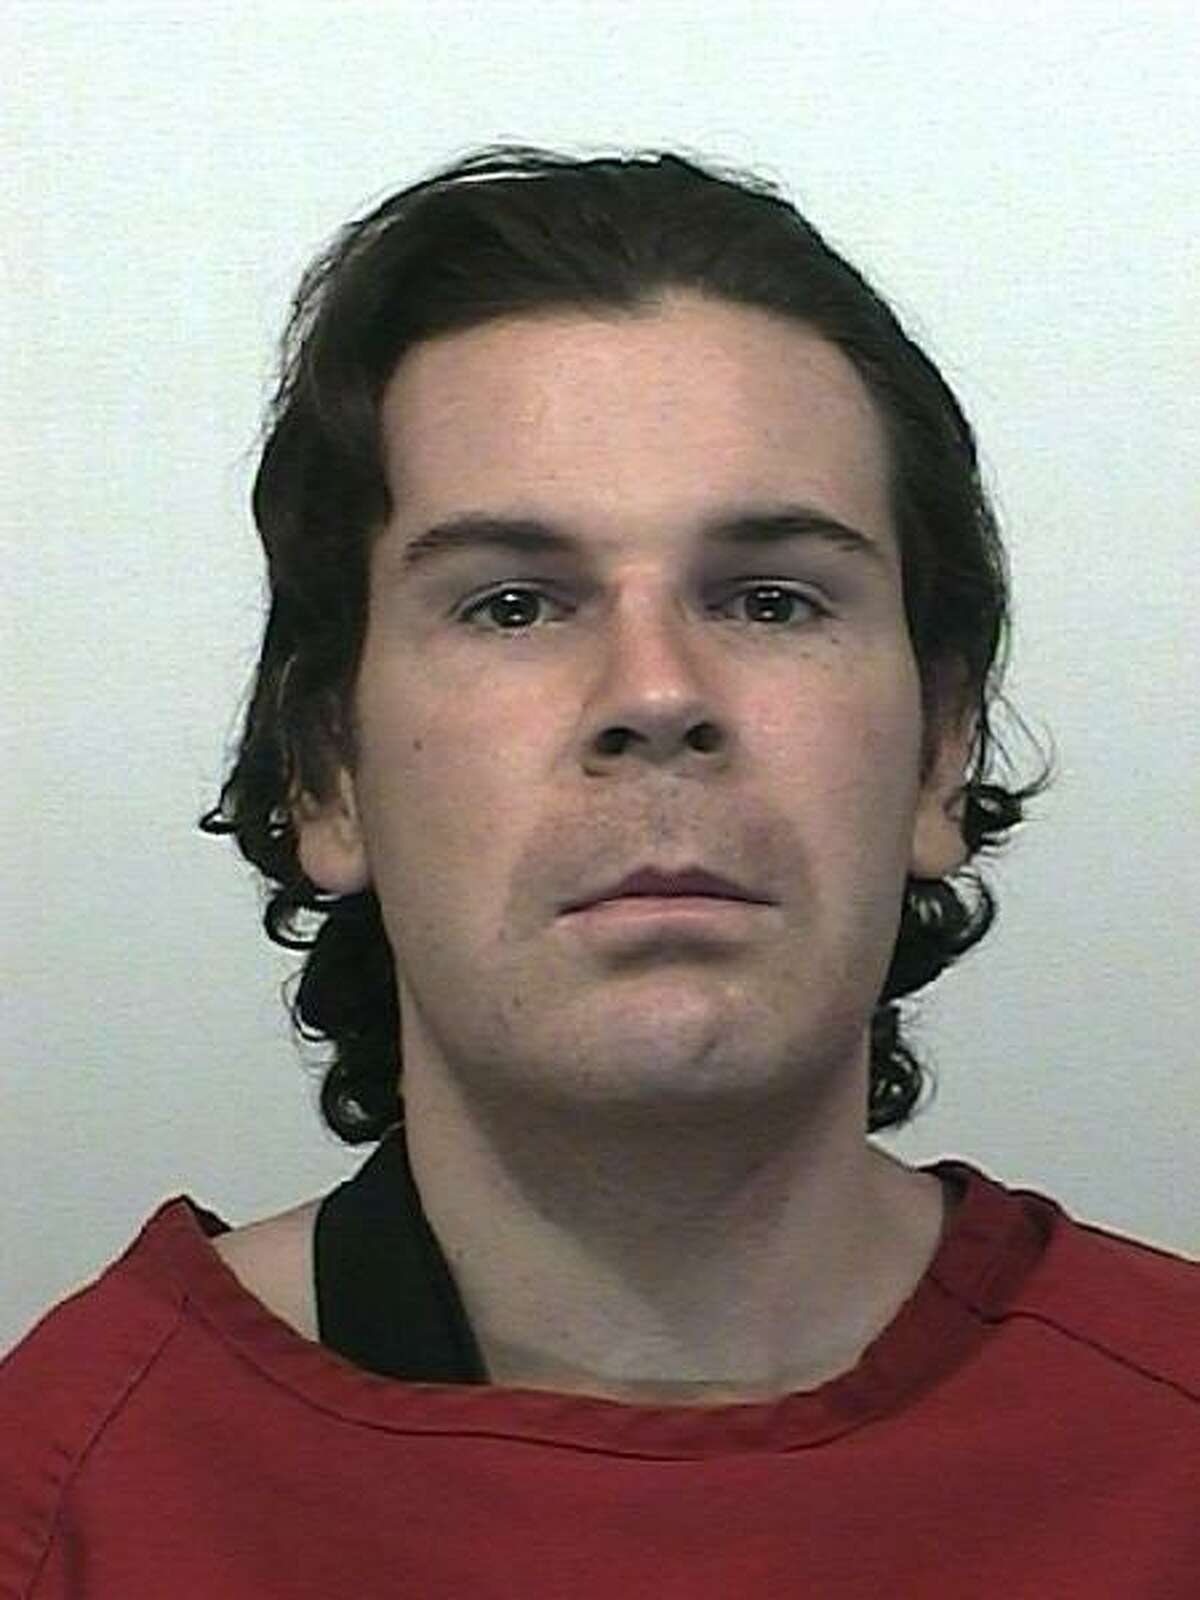 Jesse Brisbin, pictured in a Department of Corrections photo.